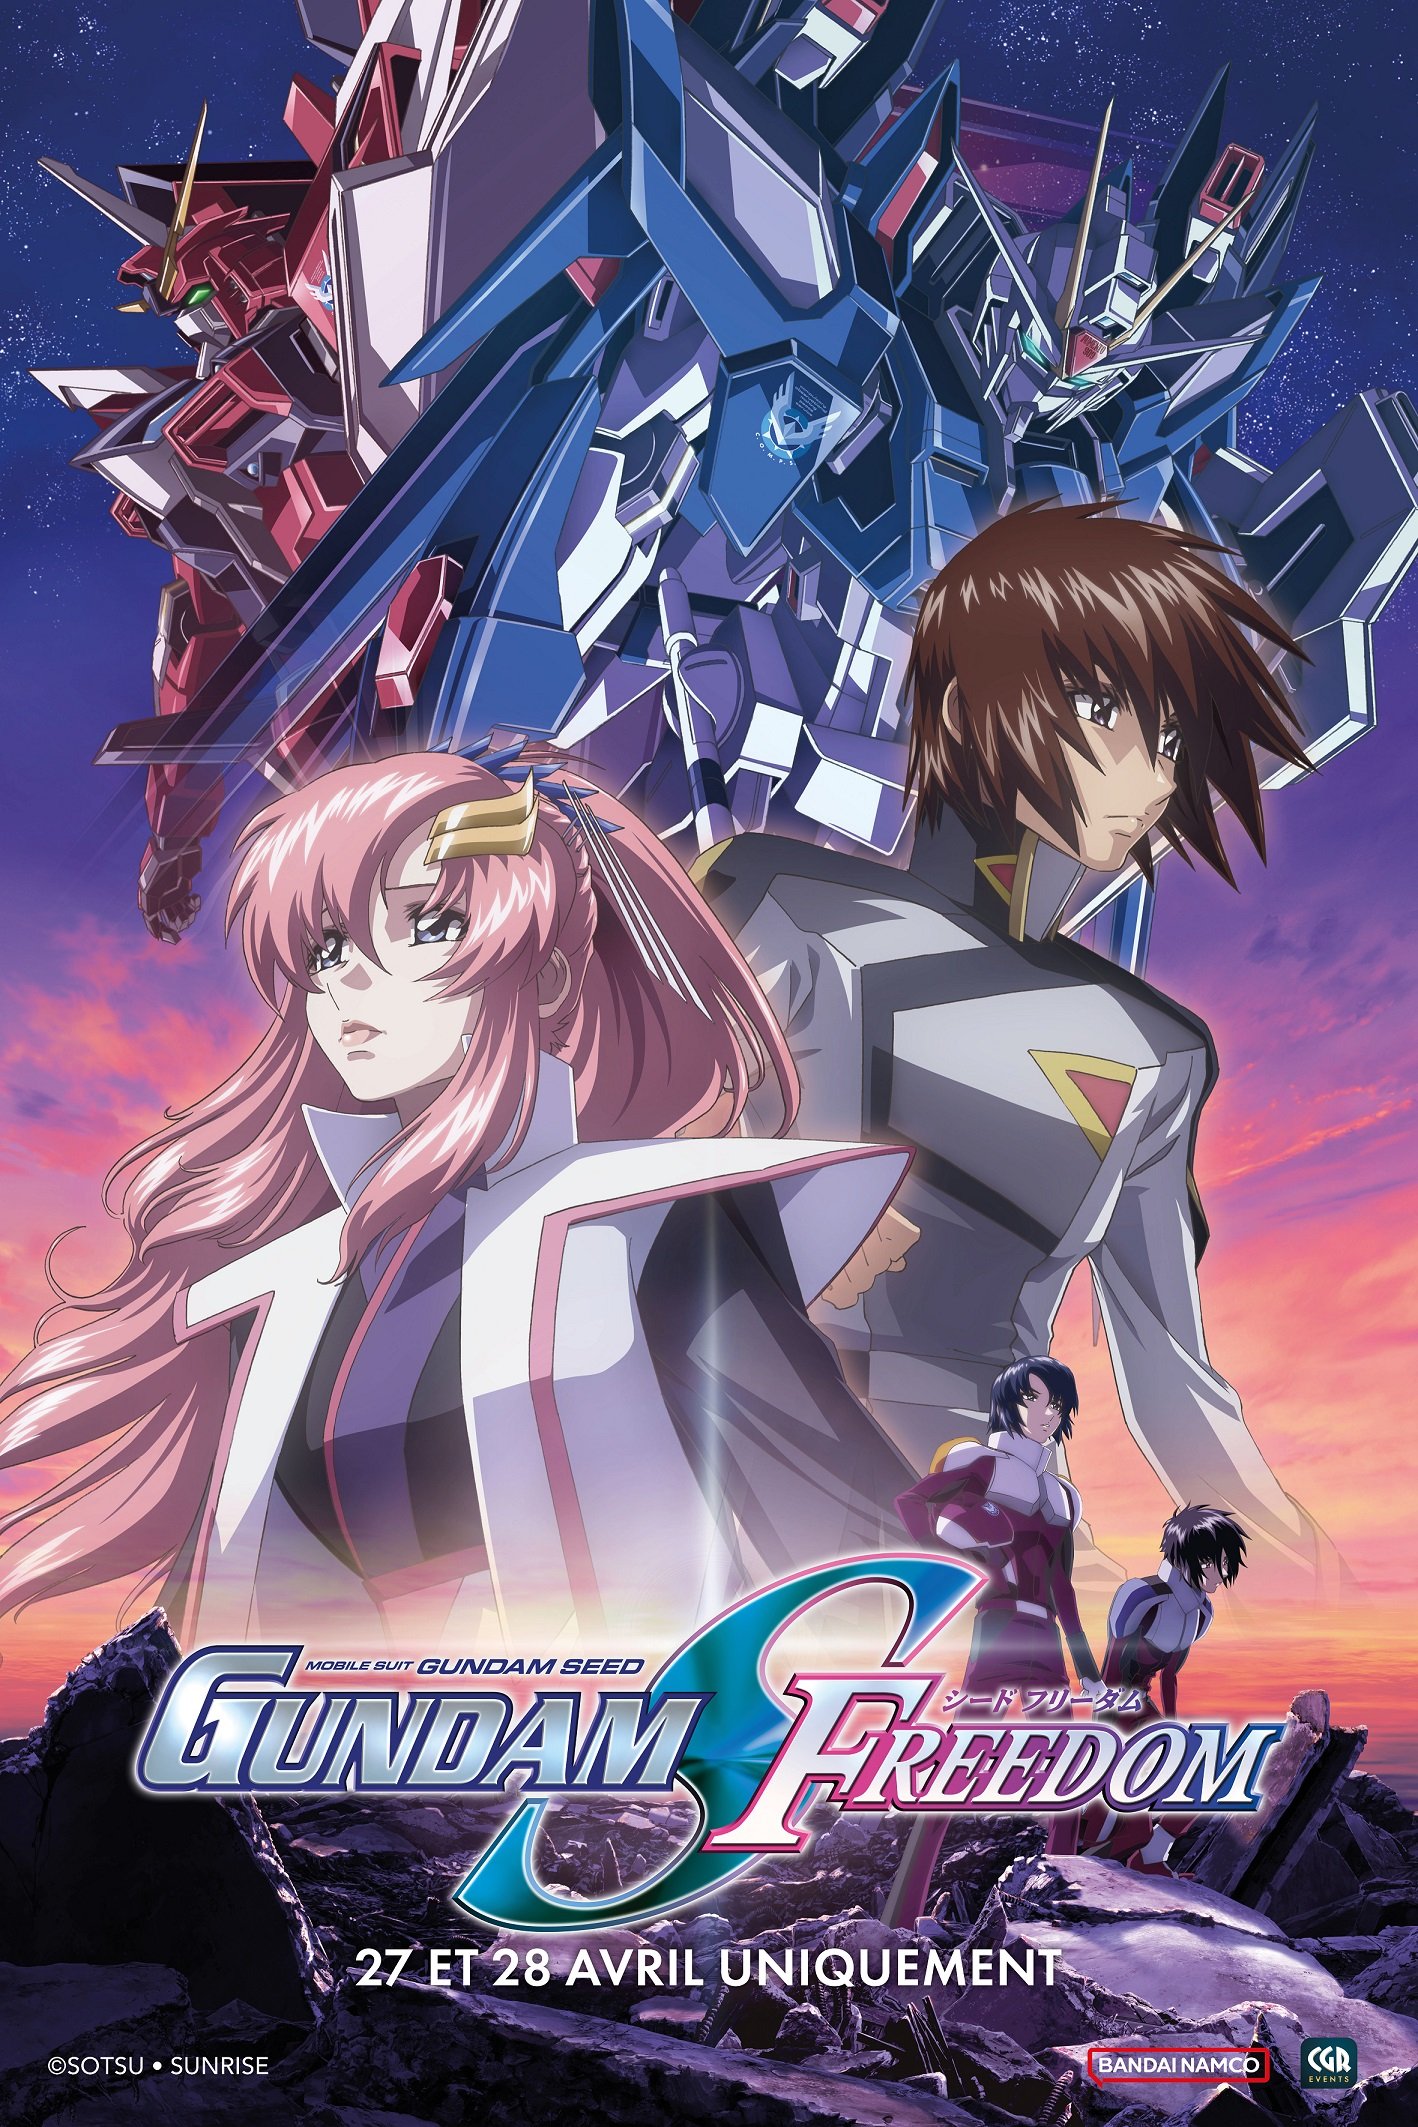 Mobile Suit Gundam Seed Freedom streaming fr